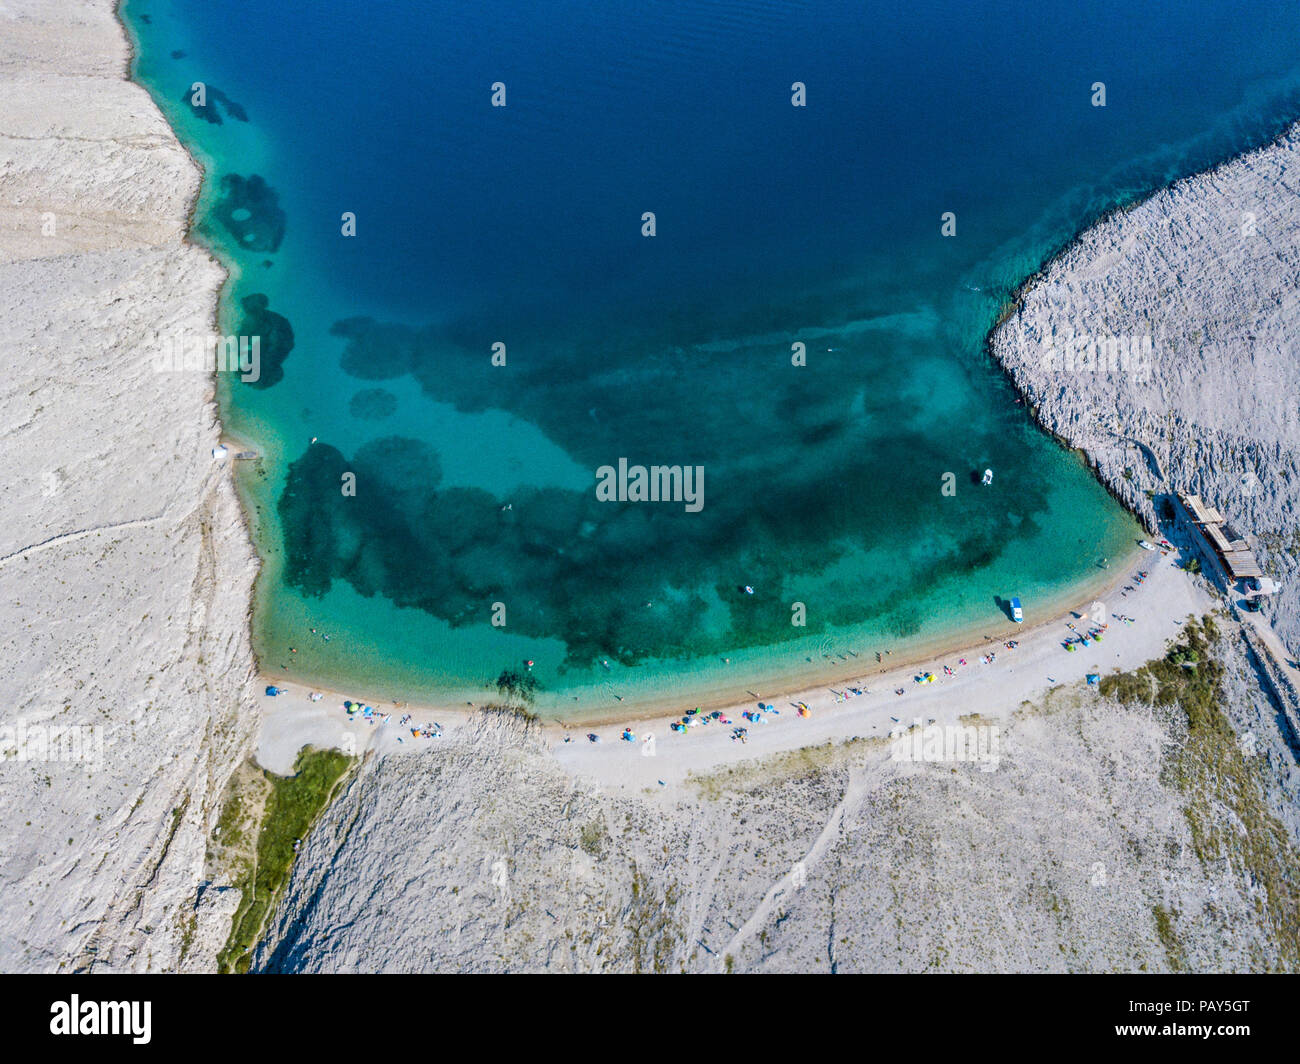 Aerial view of Rucica beach on Pag island, Metajna, Croatia. Seabed and beach seen from above. Promontories and cliffs of Croatian coasts. Holiday Stock Photo